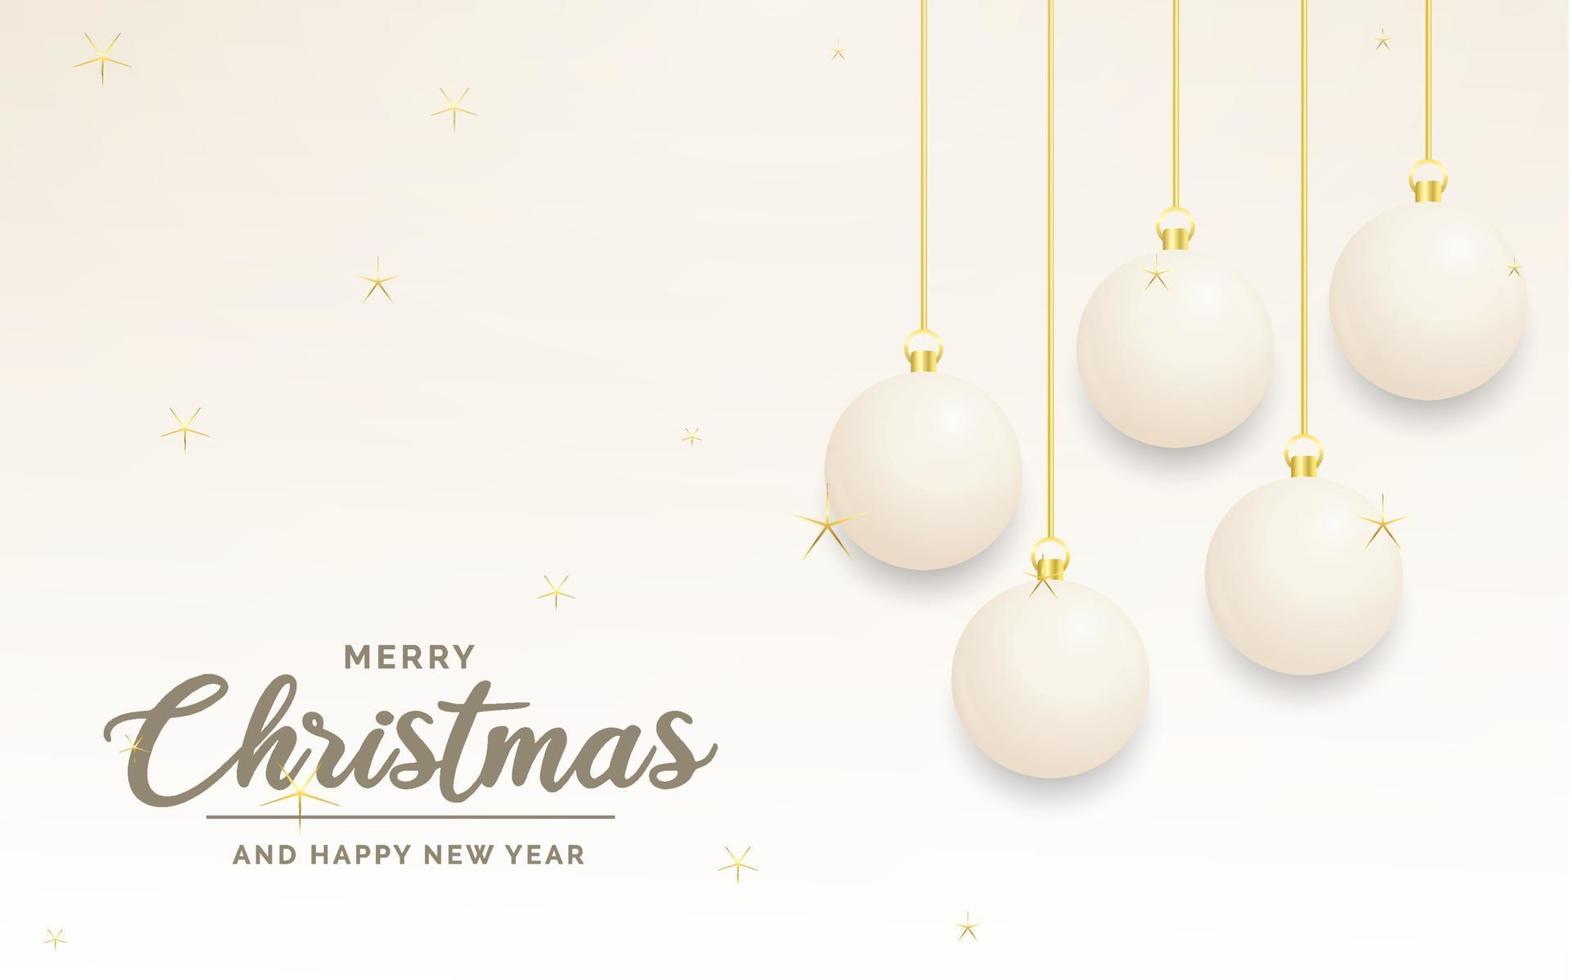 Festive Christmas decoration White and gold christmas balls for website. social networks. blog or your video channel vector